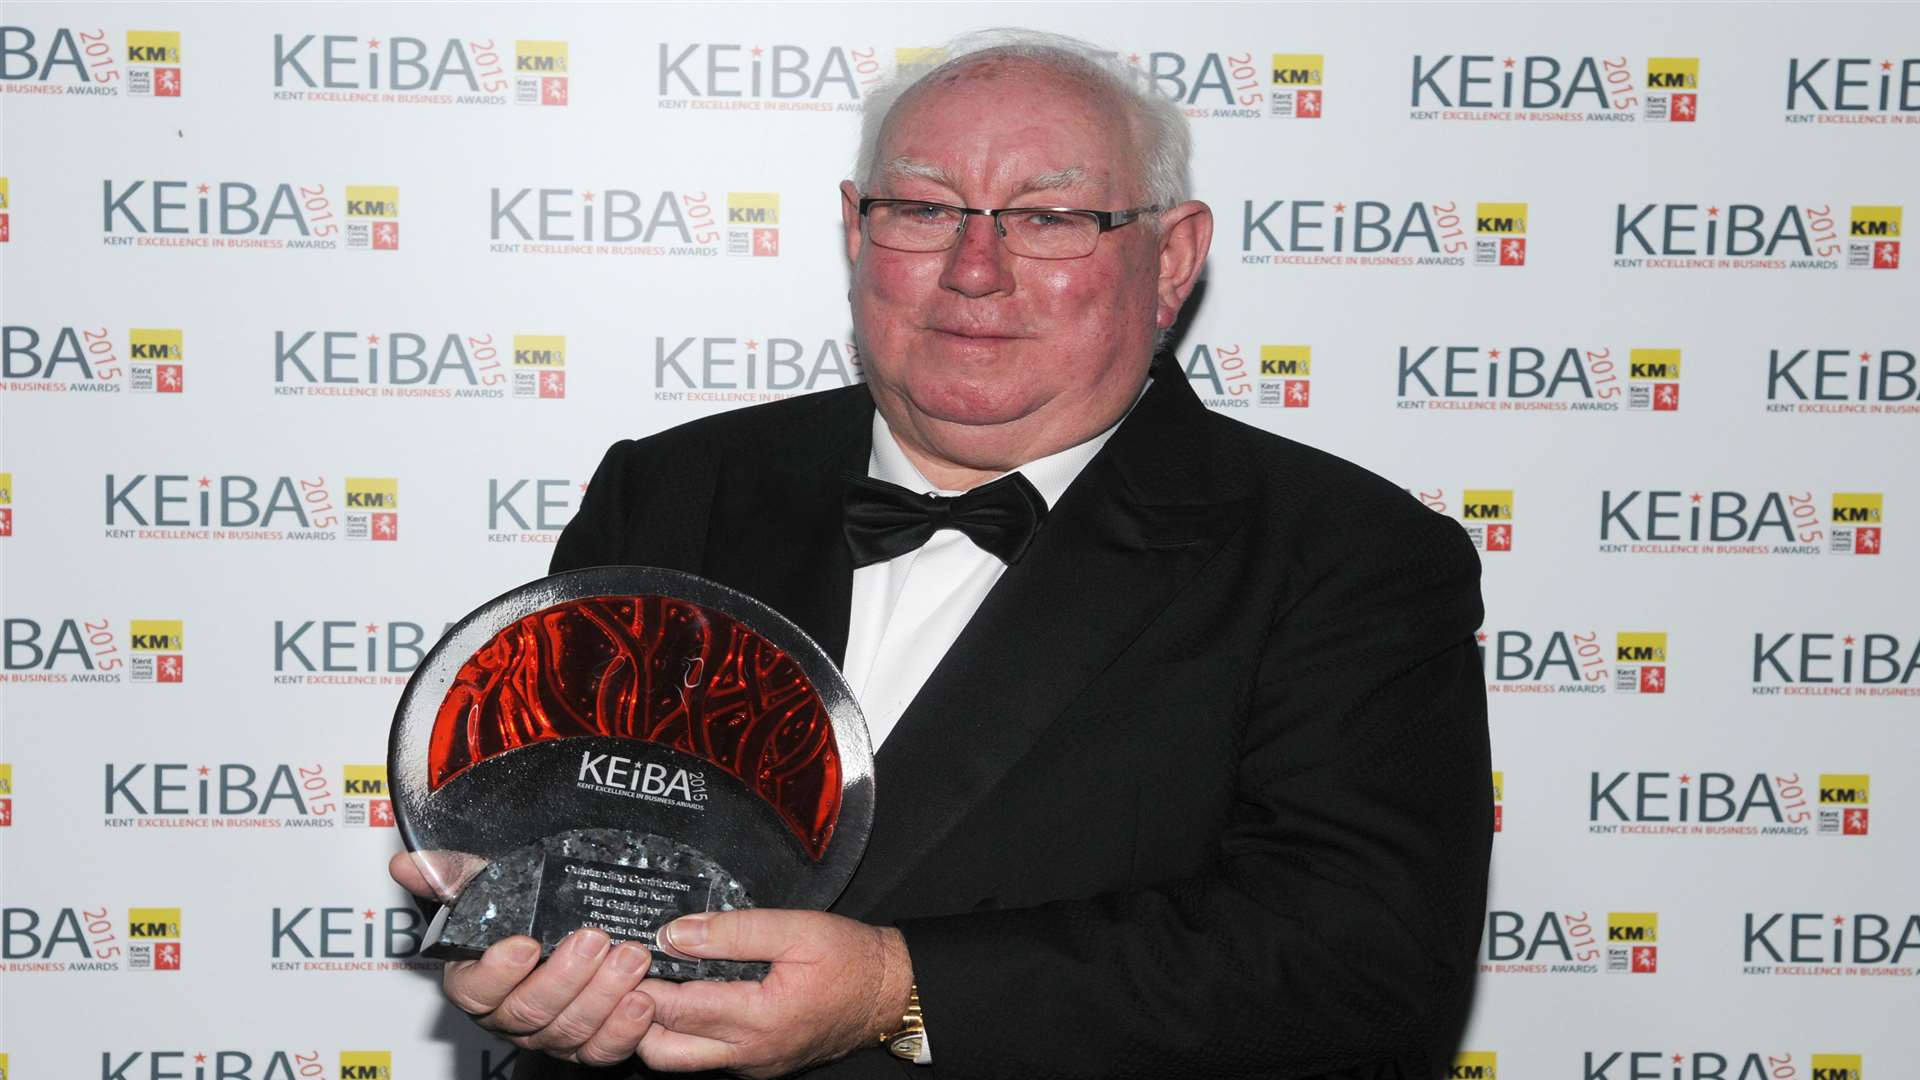 Pat Gallagher was honoured for Outstanding Contribution to Business in Kent